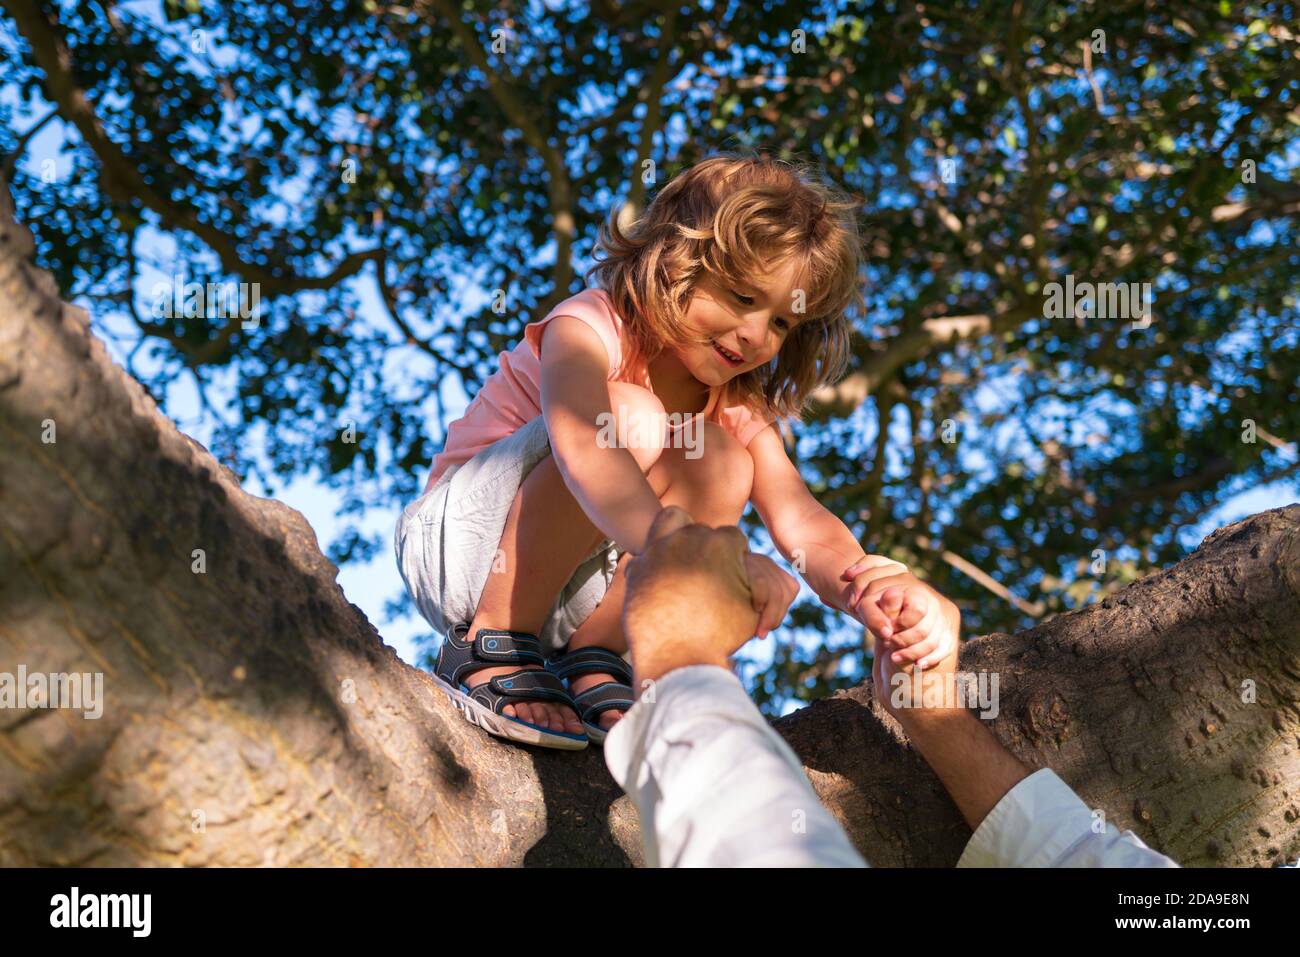 Insurance kids. Kids climbing on a trees. Child protection. Parent holds the hand of a child. Stock Photo